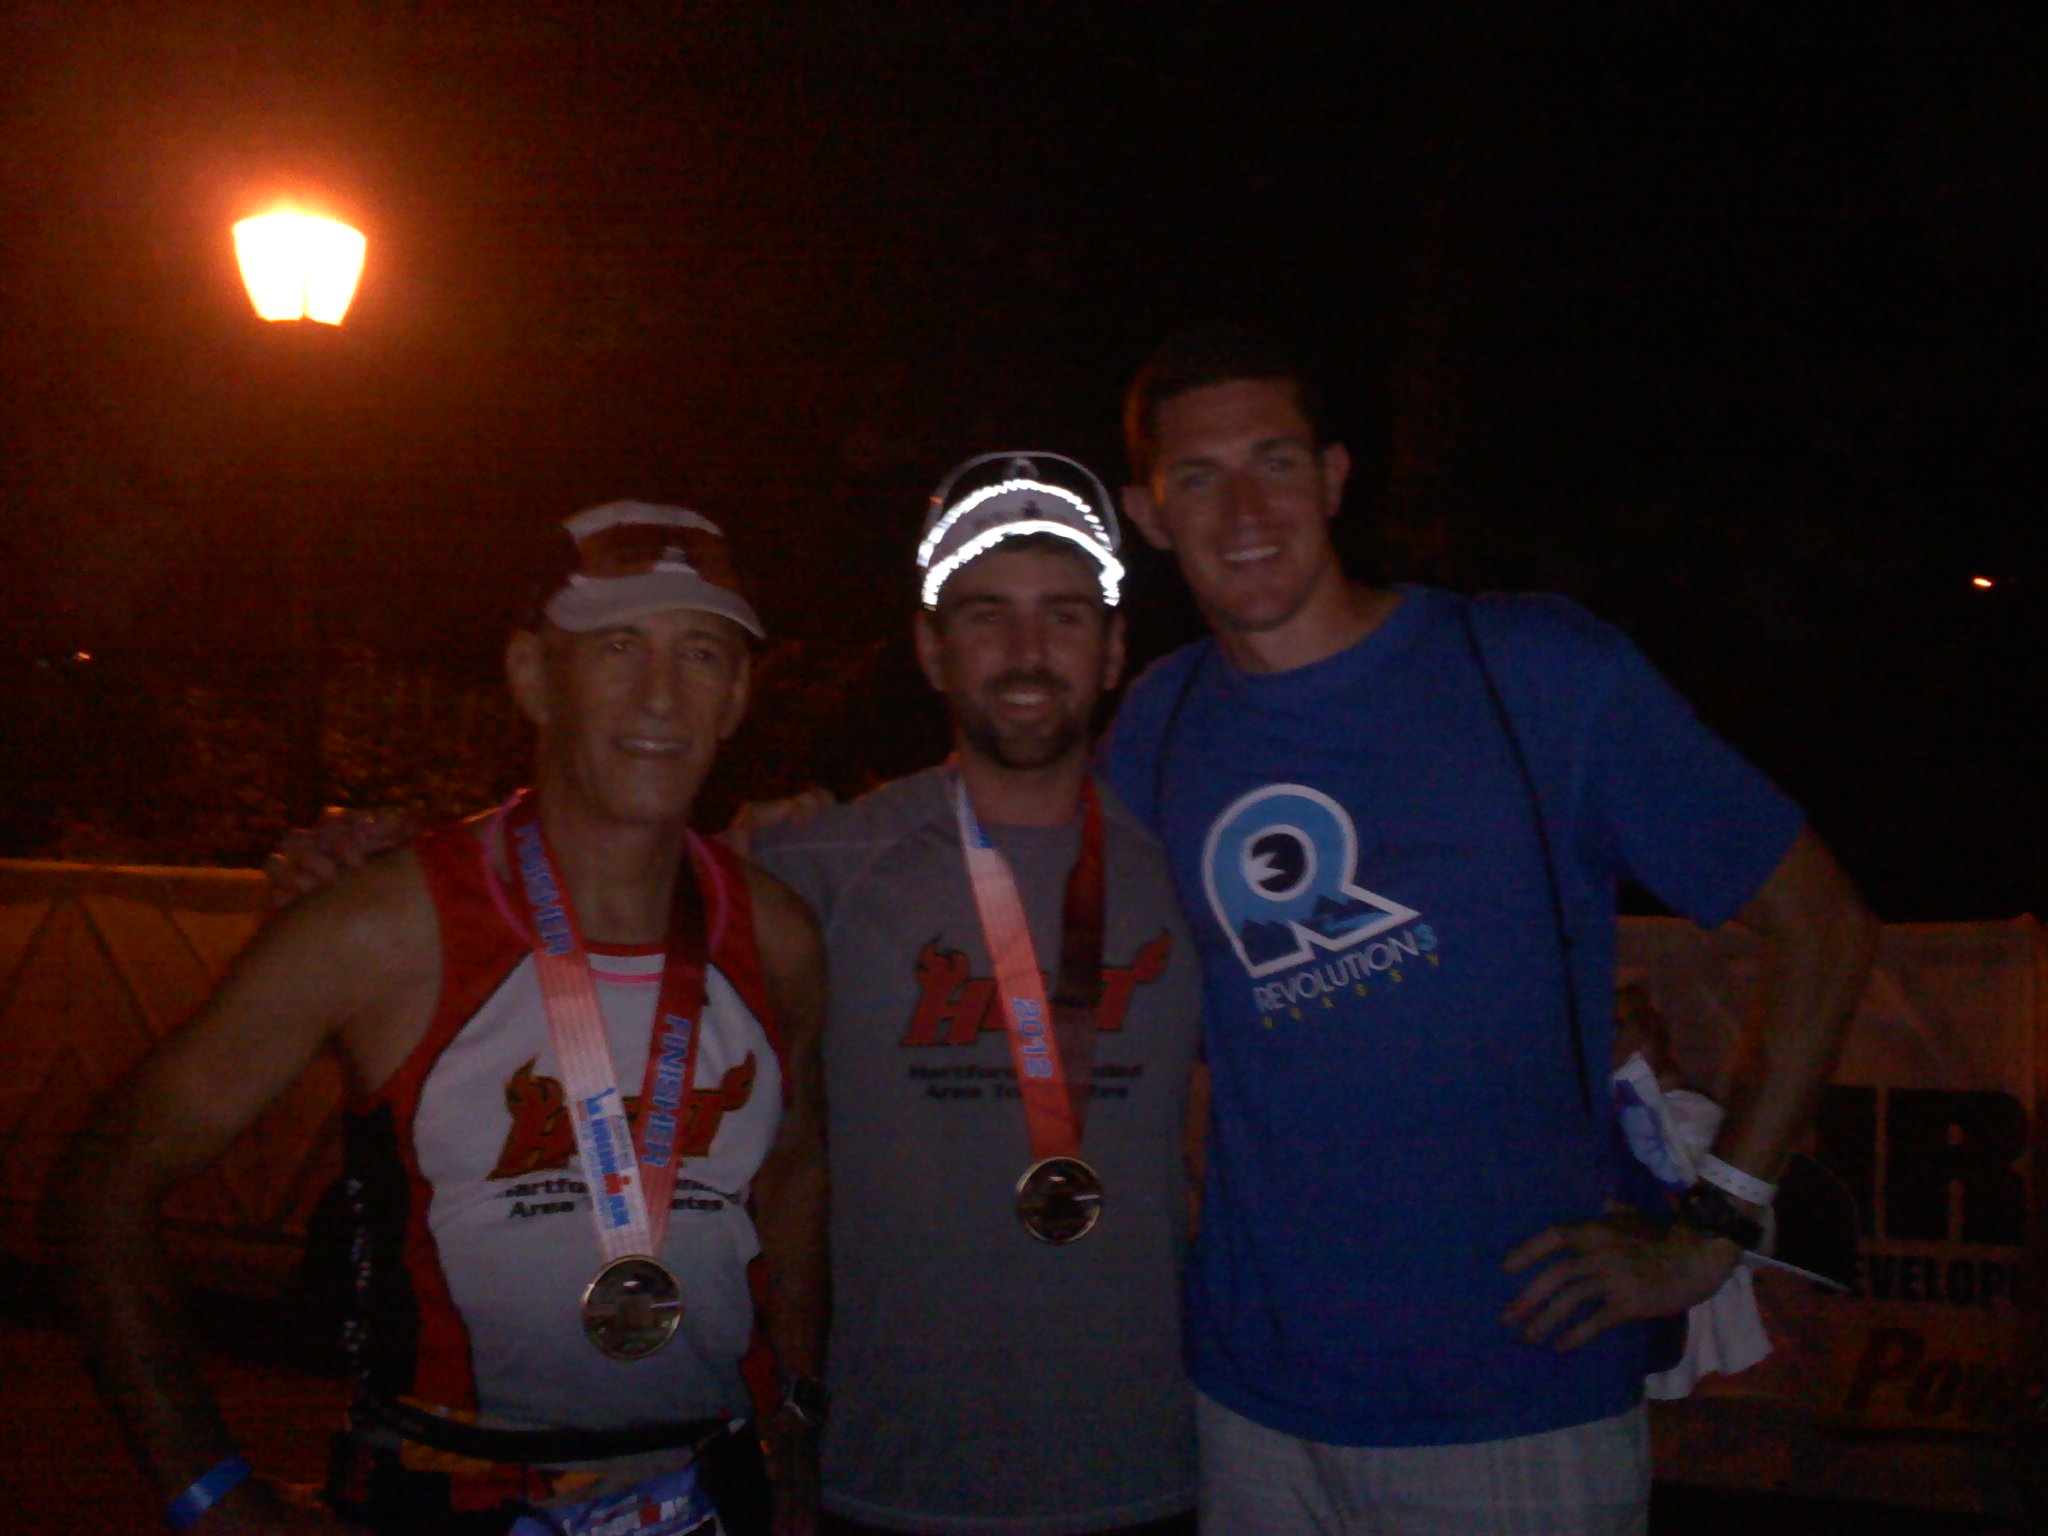 Tony and Bill Lombardi with Chris Hains after Iron Man New York